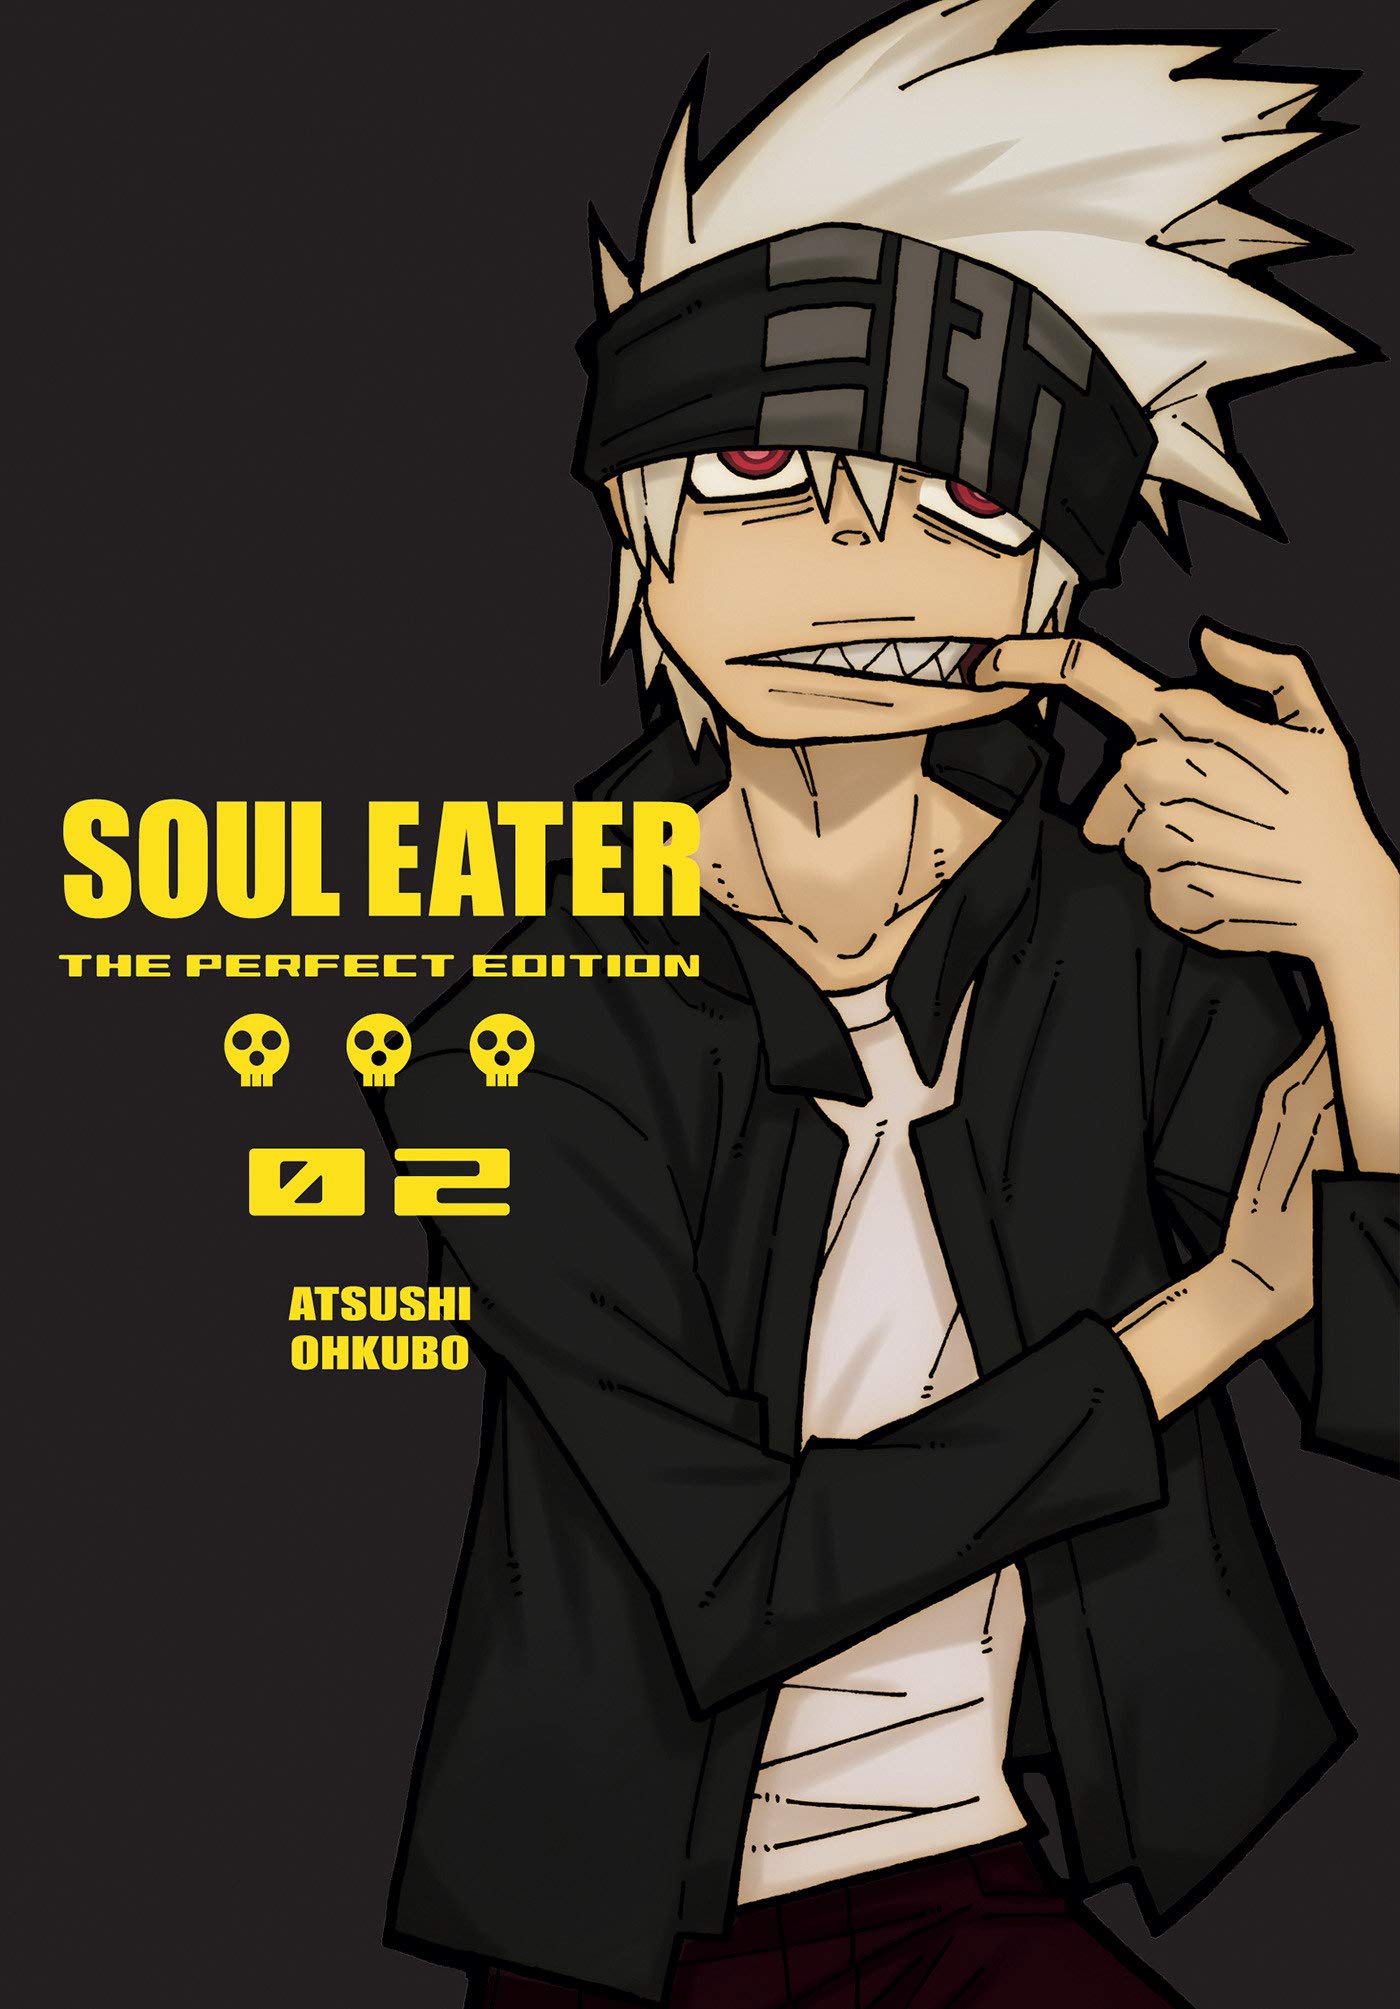 Soul Eater: The Perfect Edition Vol. 02